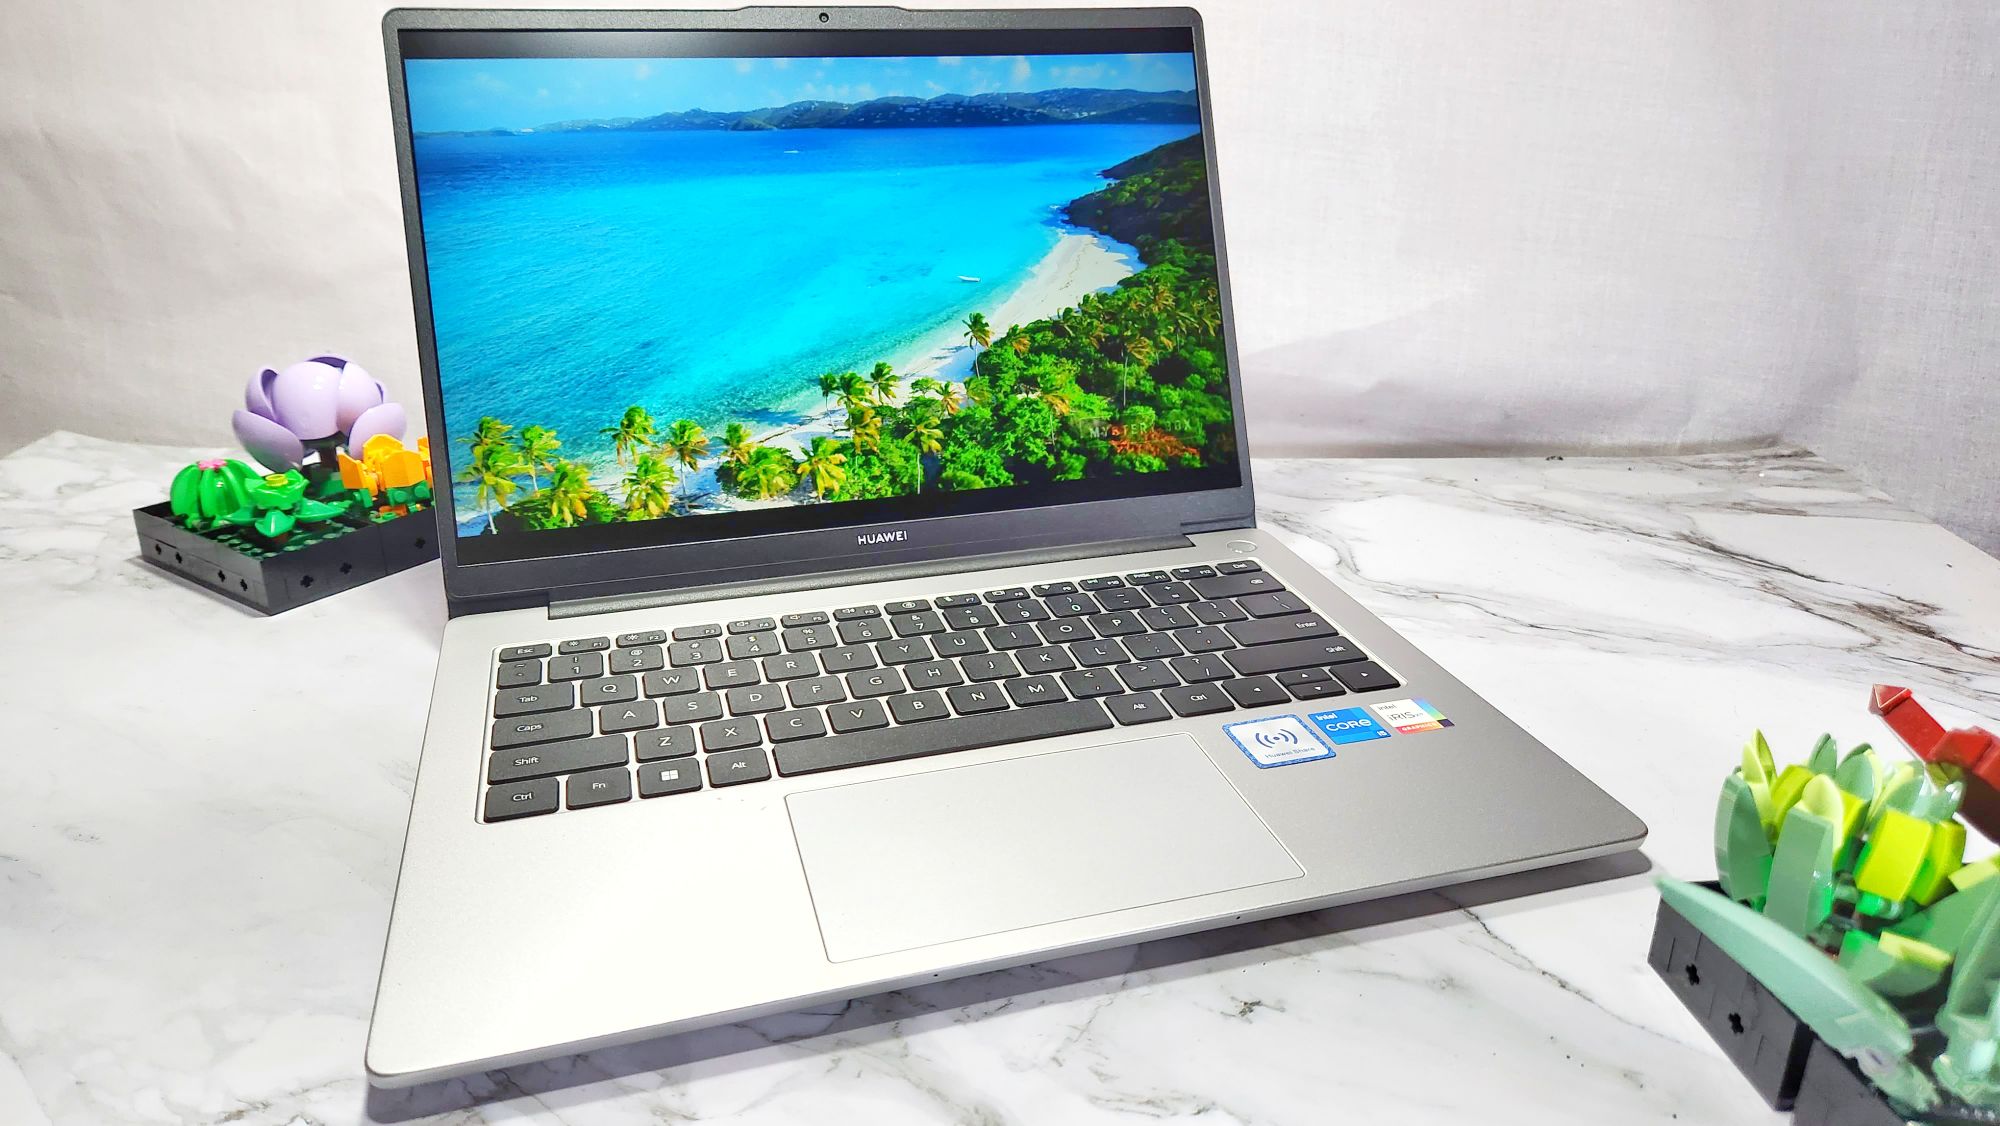 Honor Magicbook 14 Laptop Review: A better version of the MateBook D 14? -   Reviews